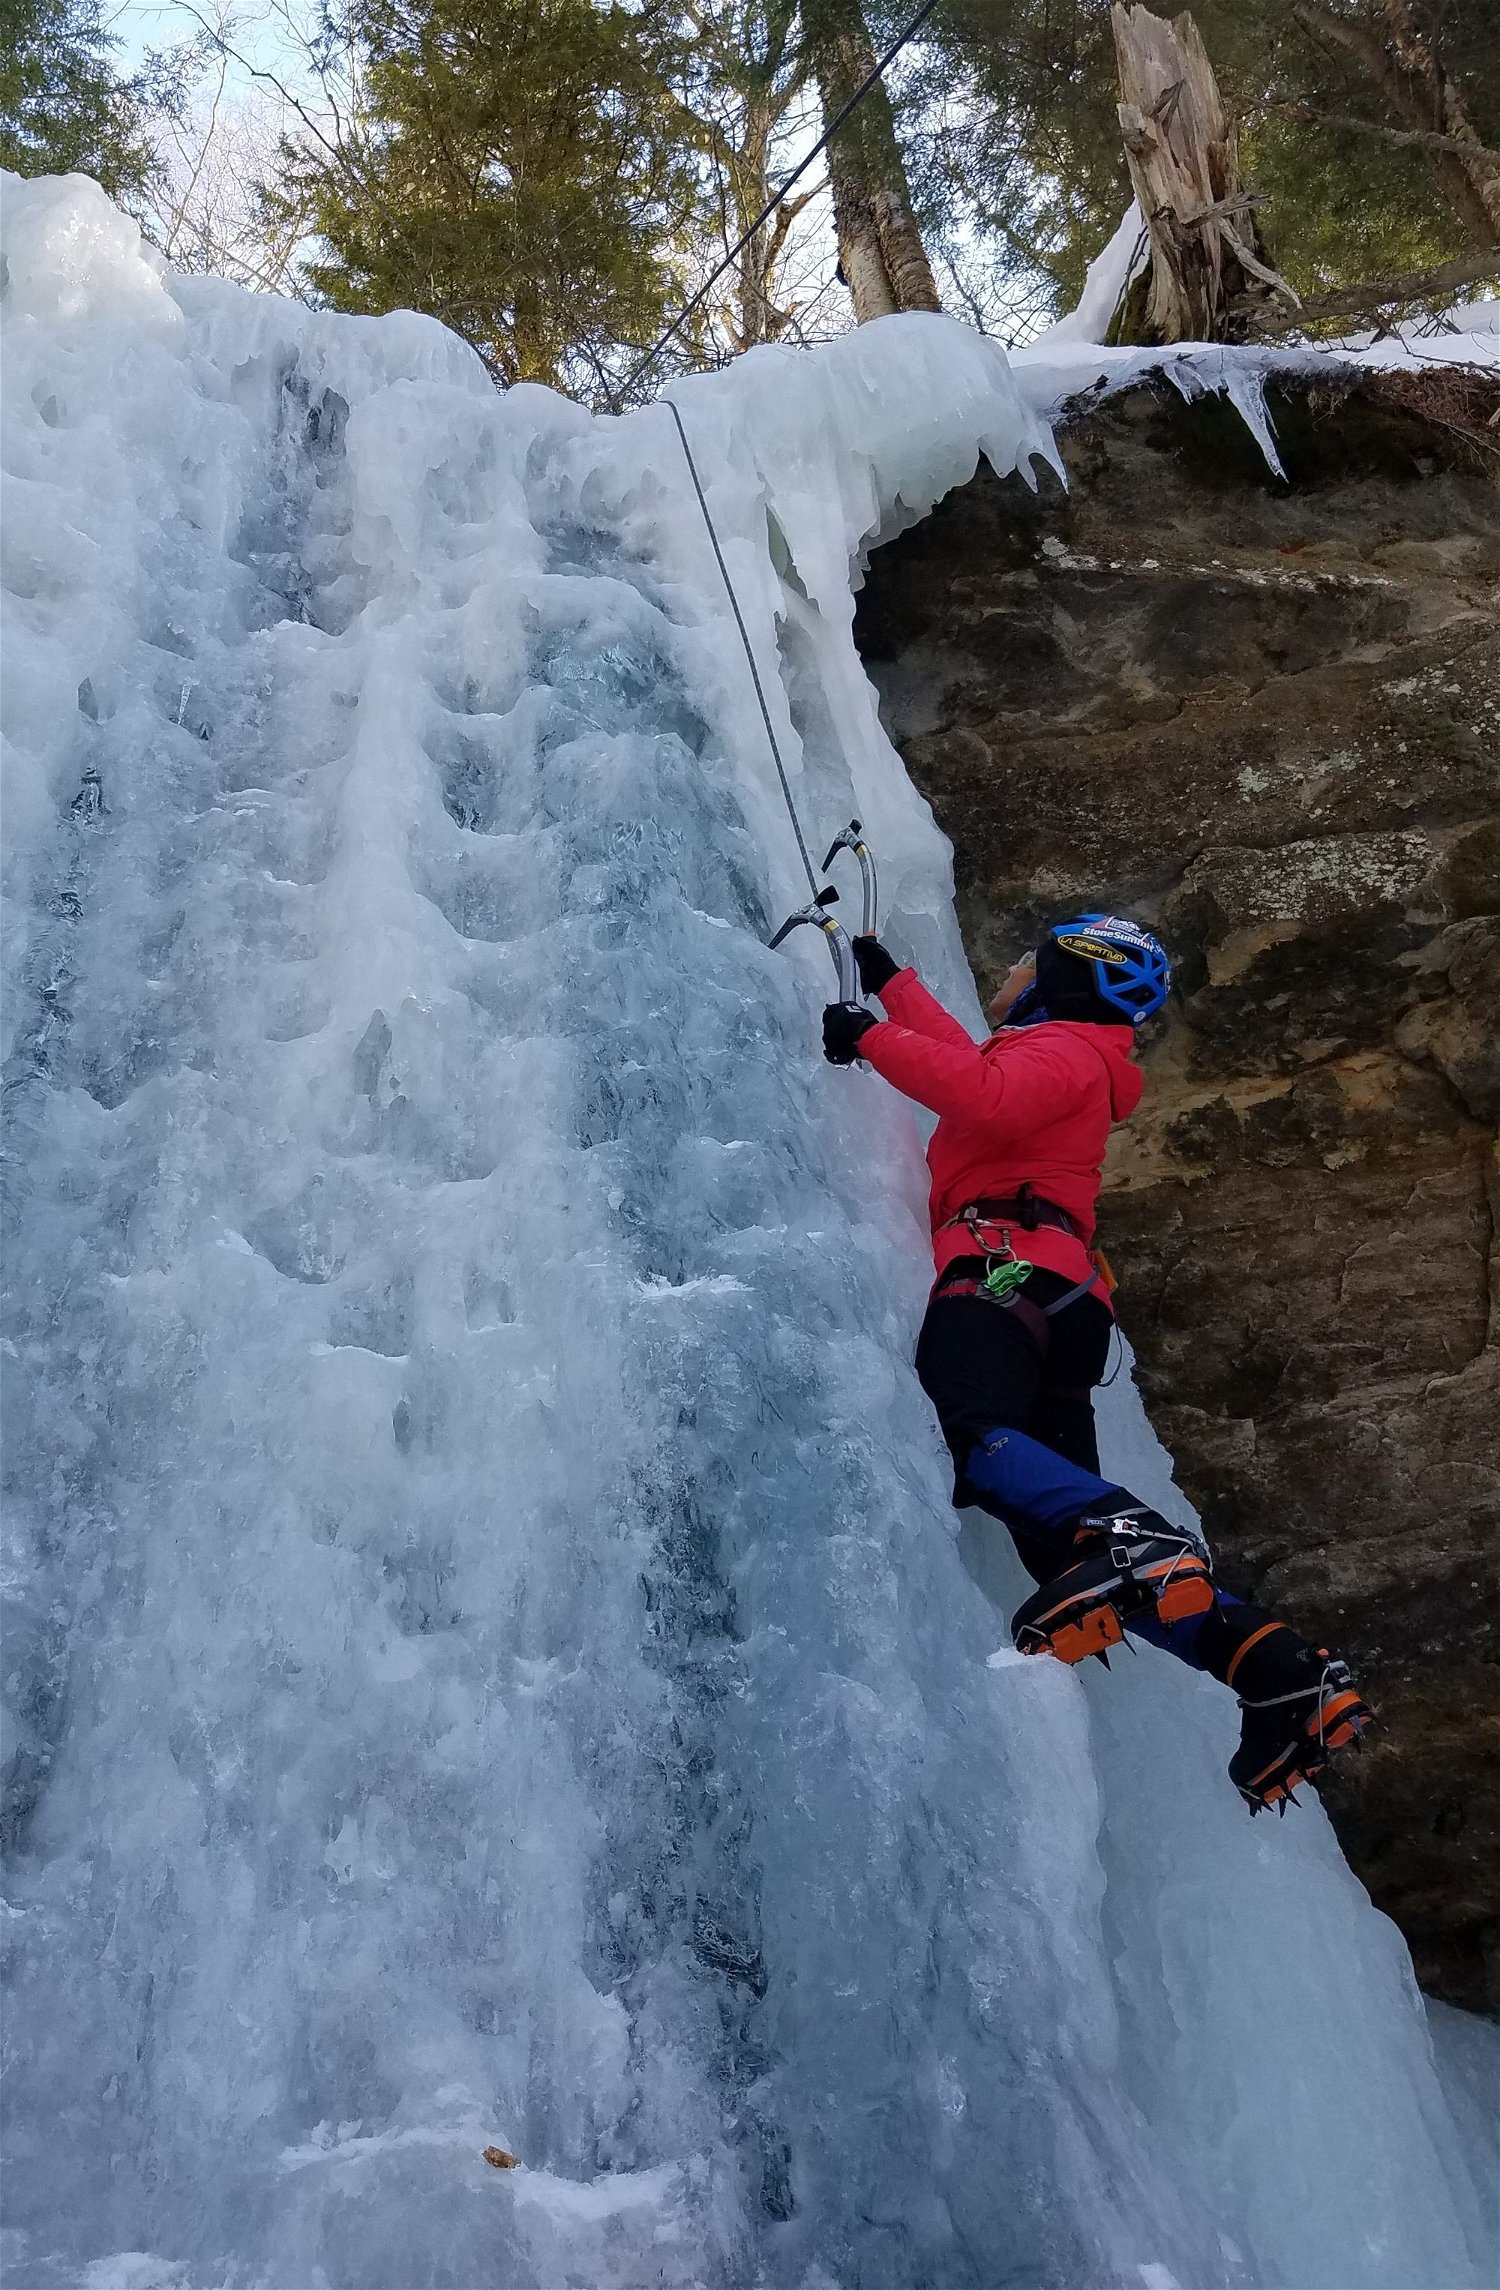 Ice climbing in Pictured Rocks National Lakeshore, Michigan